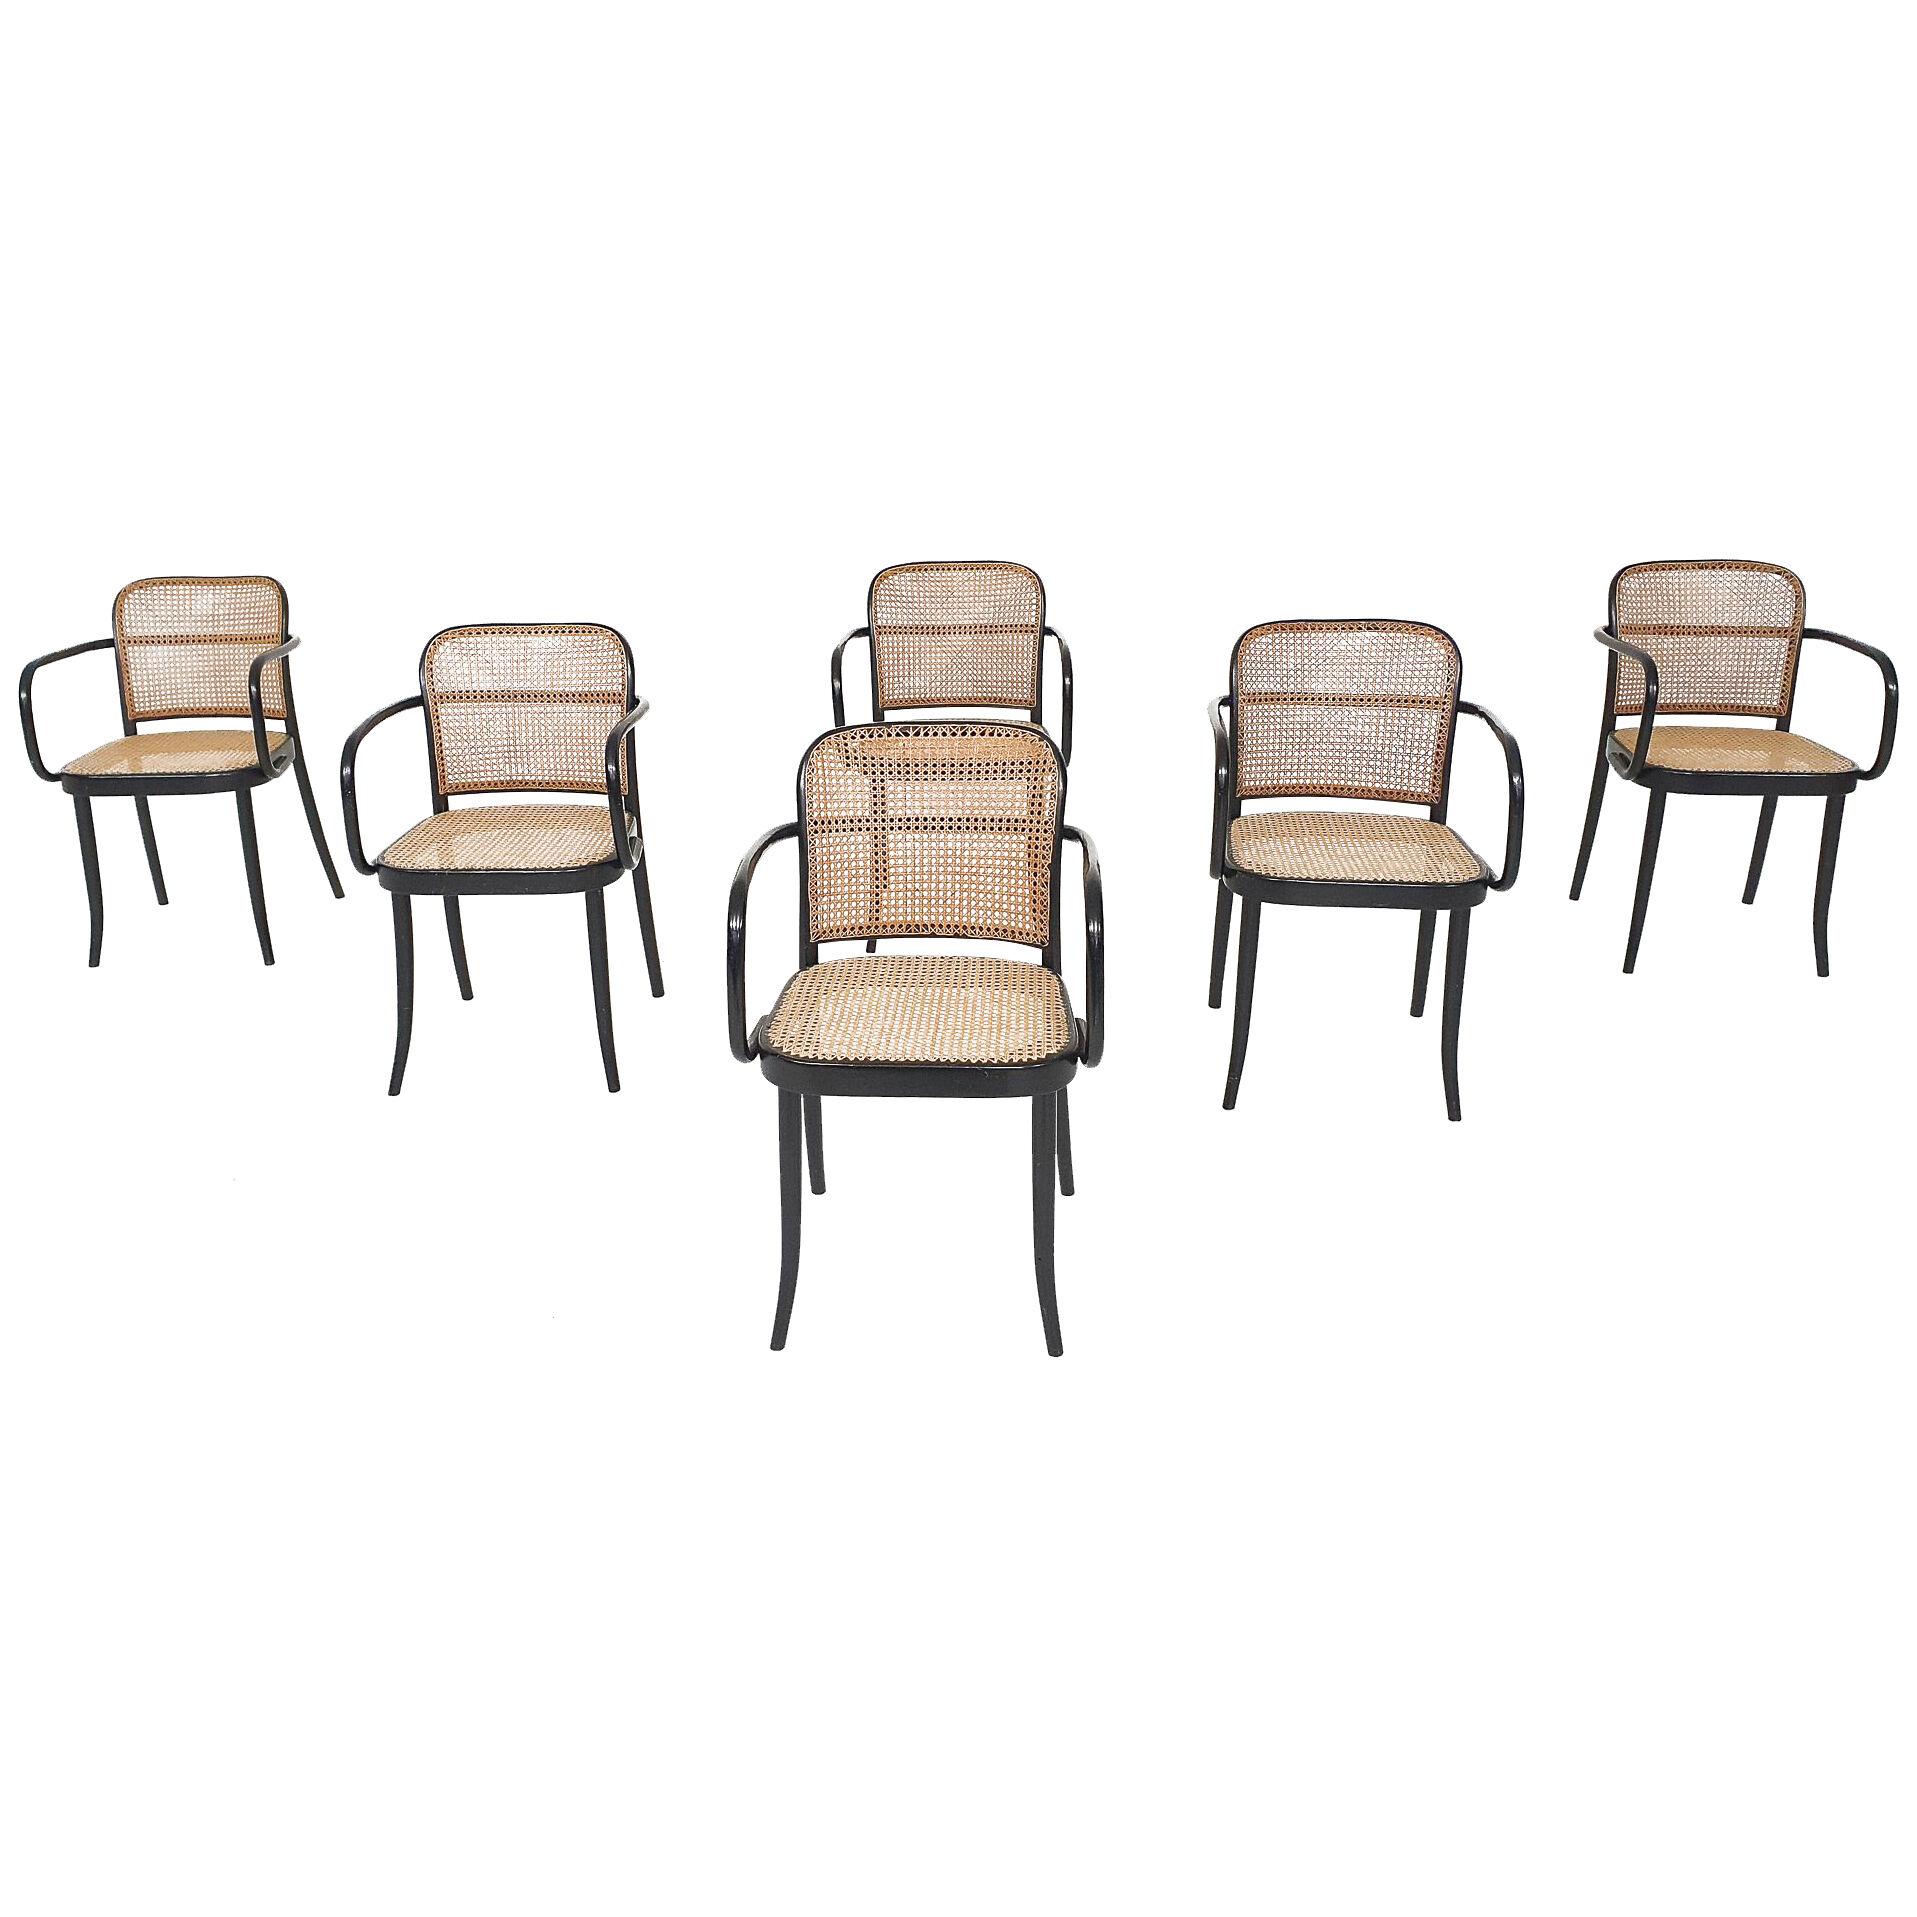 Set of six Josef Hoffman for Thonet a811 dining chairs